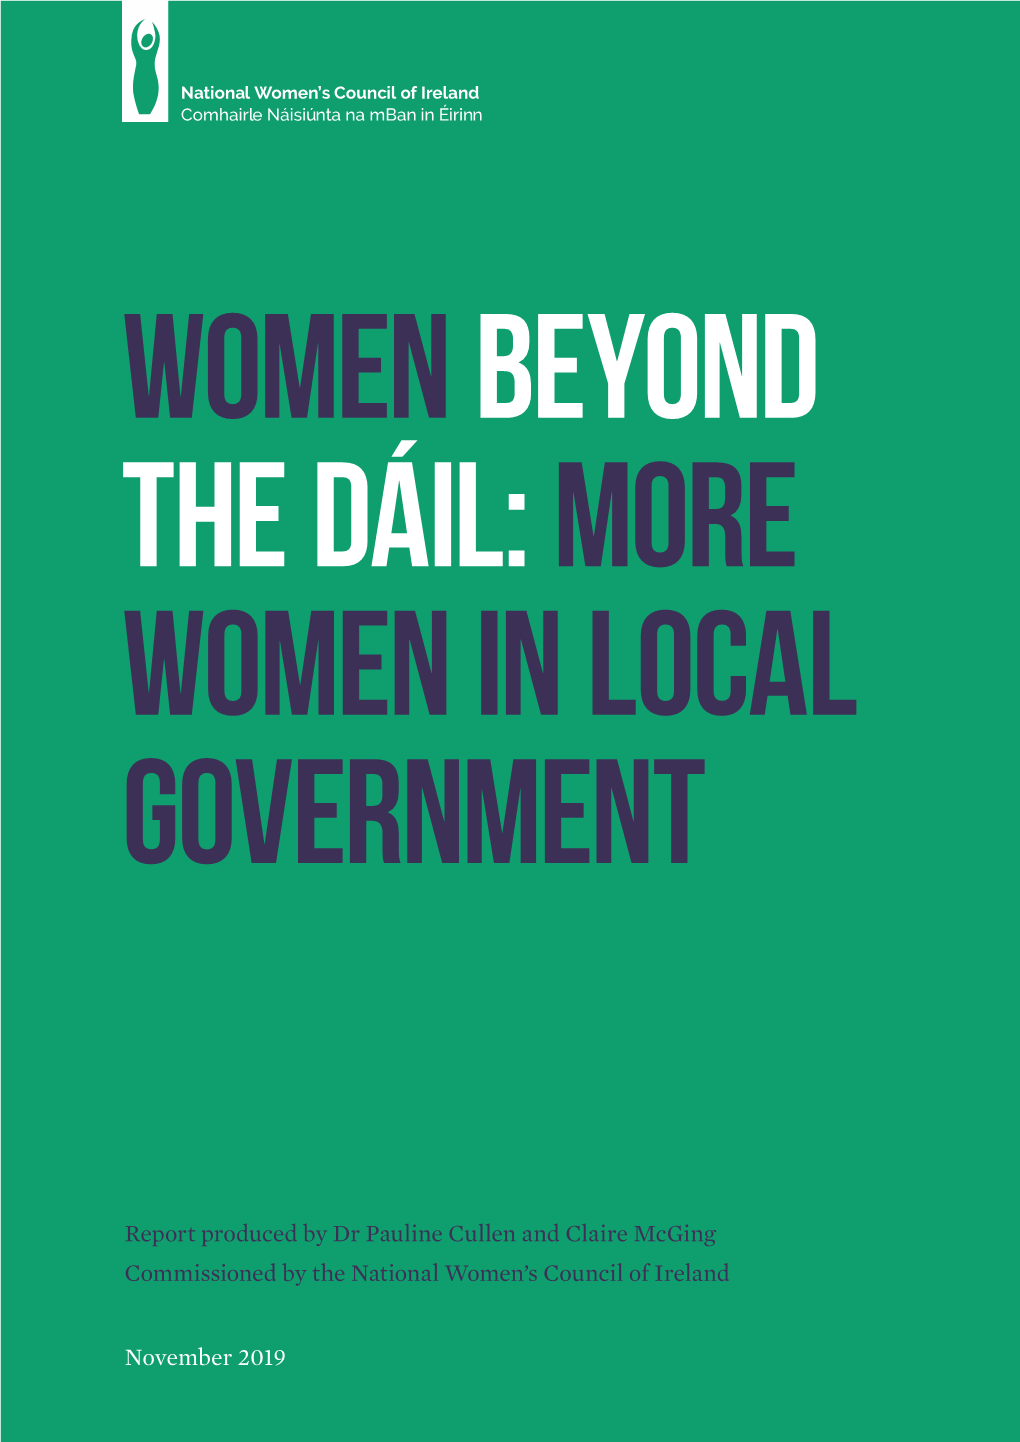 Women Beyond the Dáil: More Women in Local Government